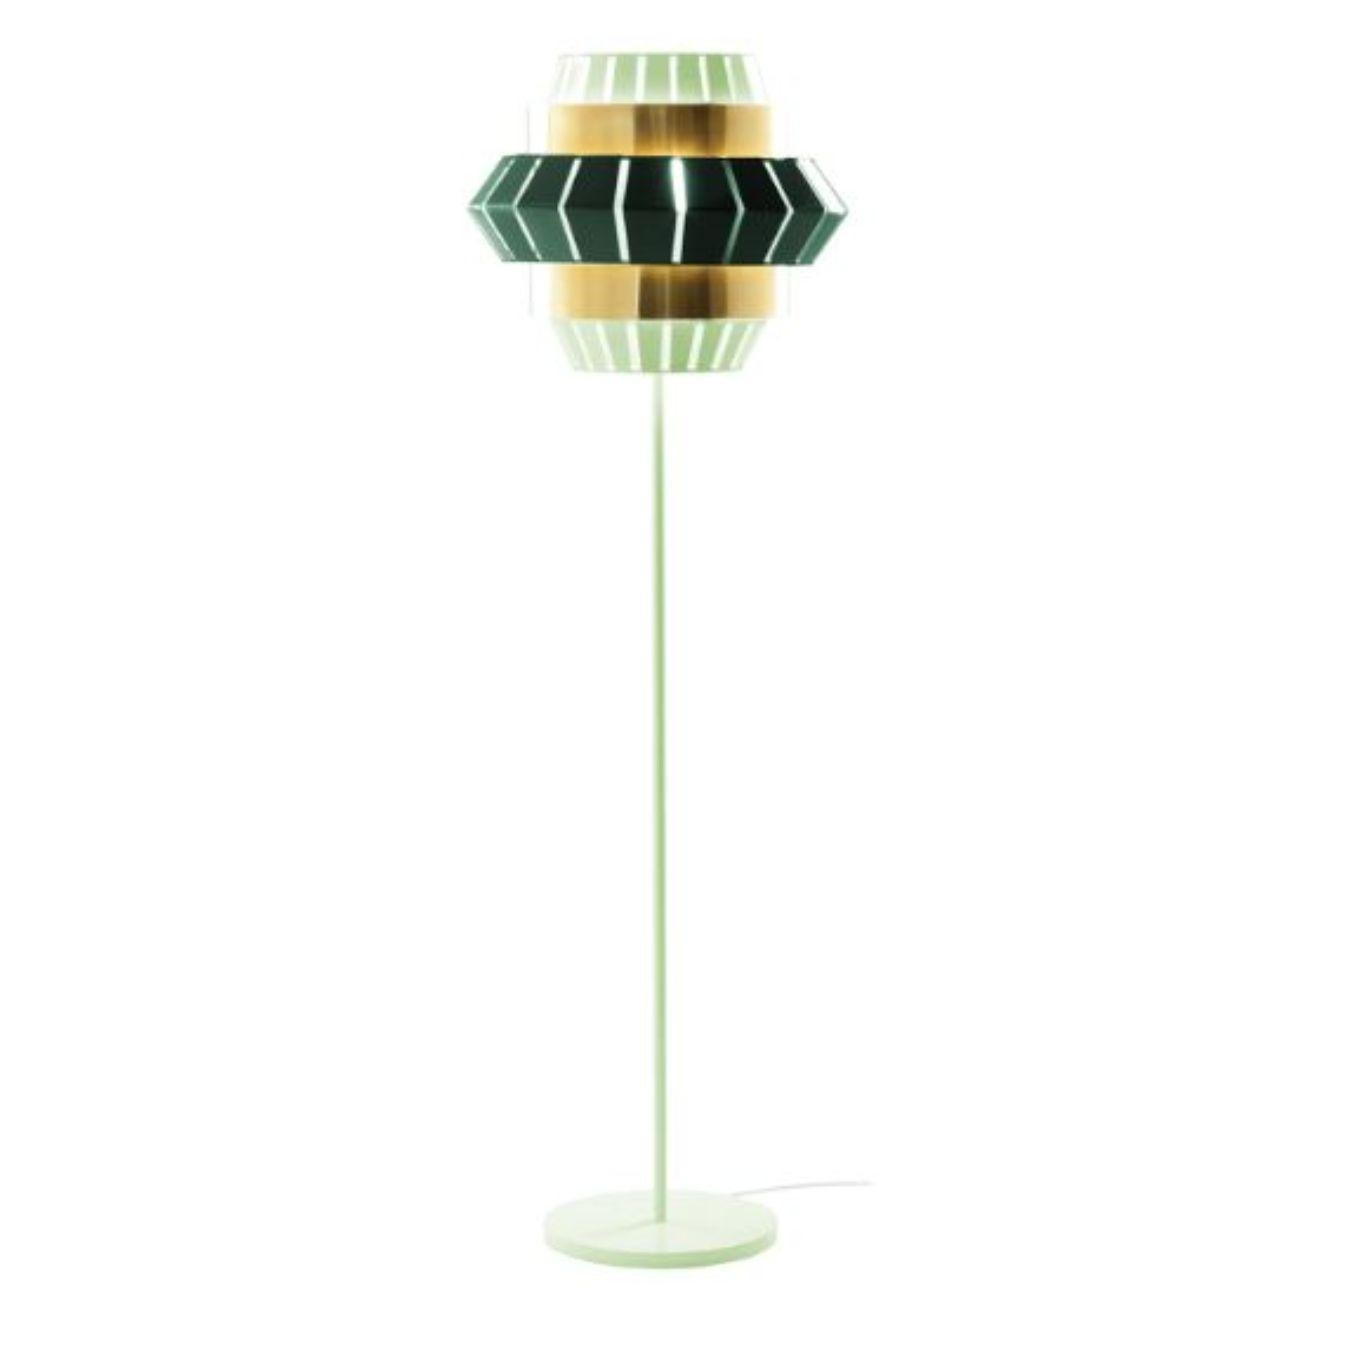 Dream and moss comb floor lamp with brass ring by Dooq
Dimensions: W 54 x D 54 x H 175 cm
Materials: lacquered metal, polished brass.
Also available in different colors and materials.

Information:
230V/50Hz
E27/1x20W LED
120V/60Hz
E26/1x15W